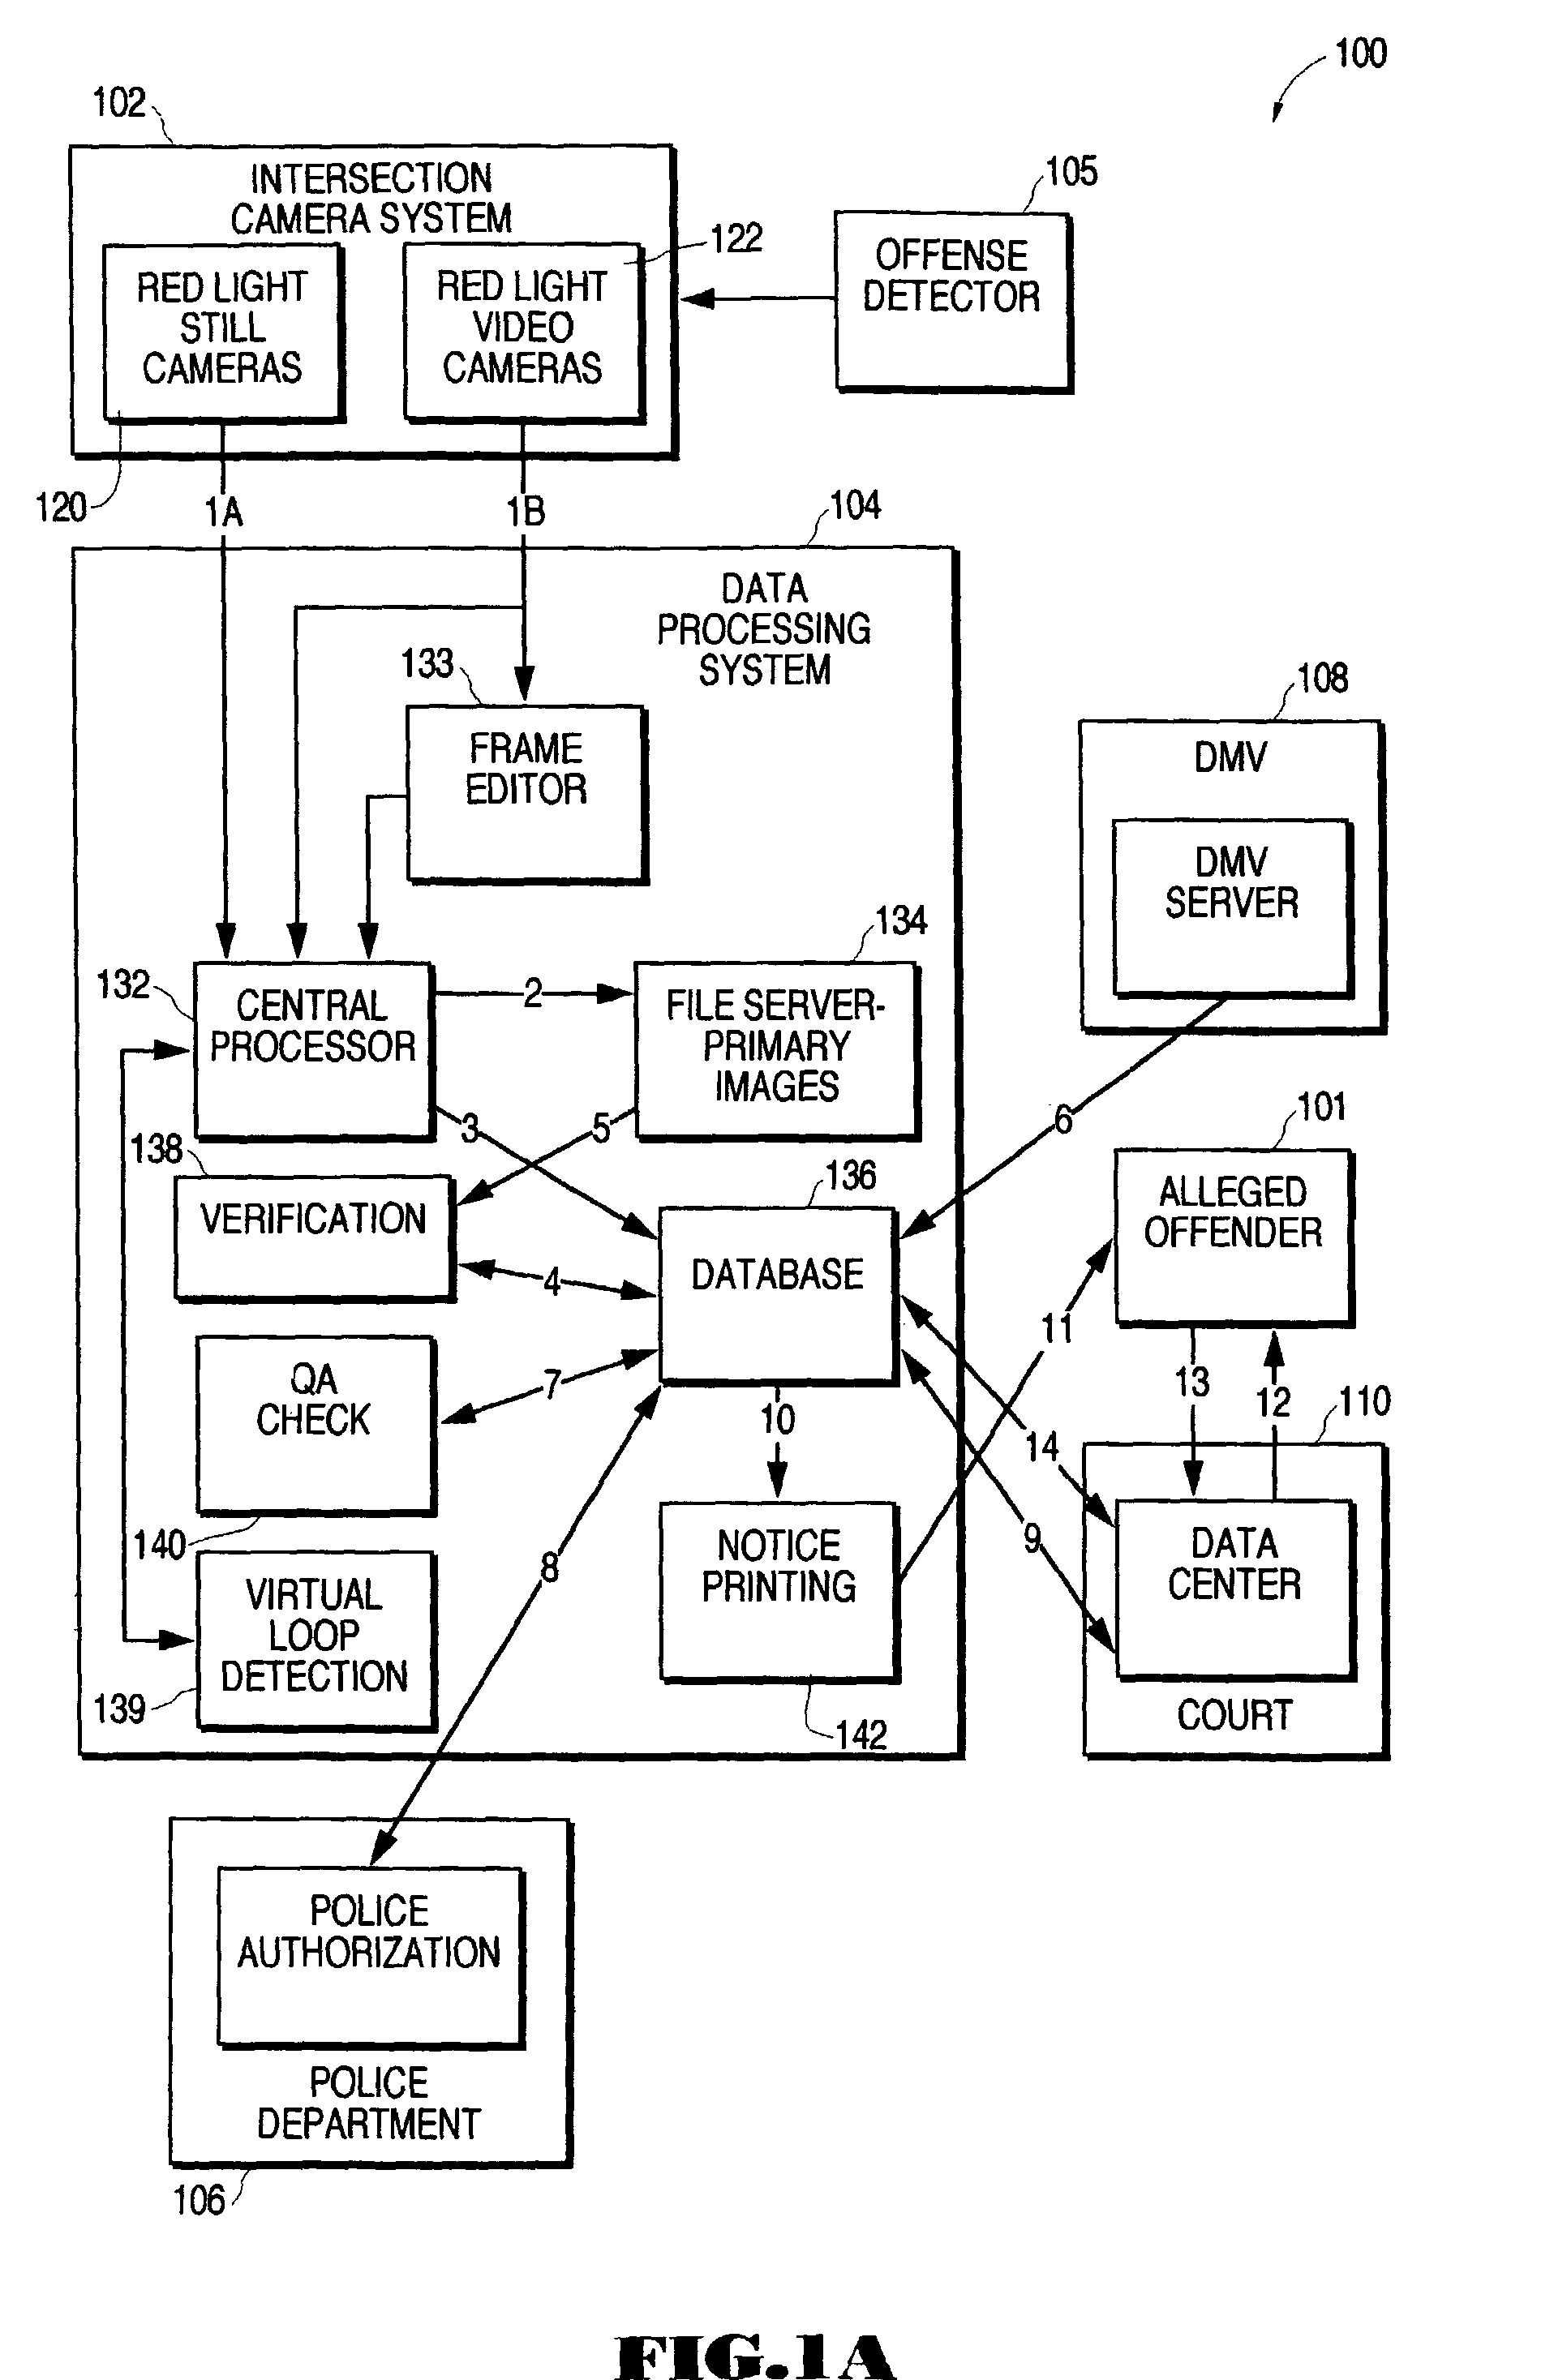 Automated traffic violation monitoring and reporting system with combined video and still-image data